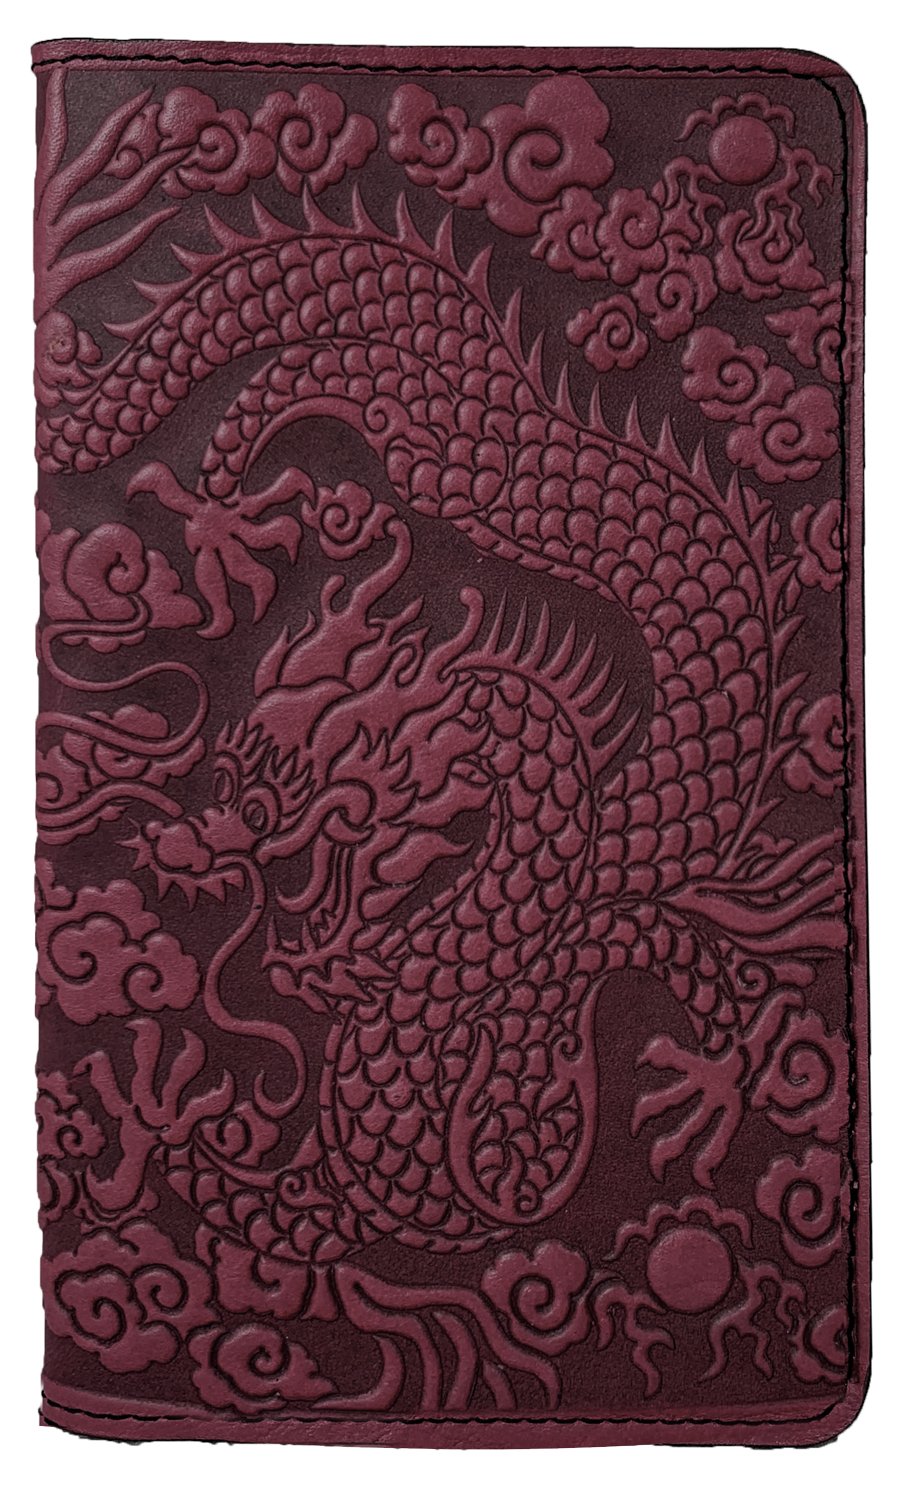 Large Leather Smartphone Wallet - Cloud Dragon